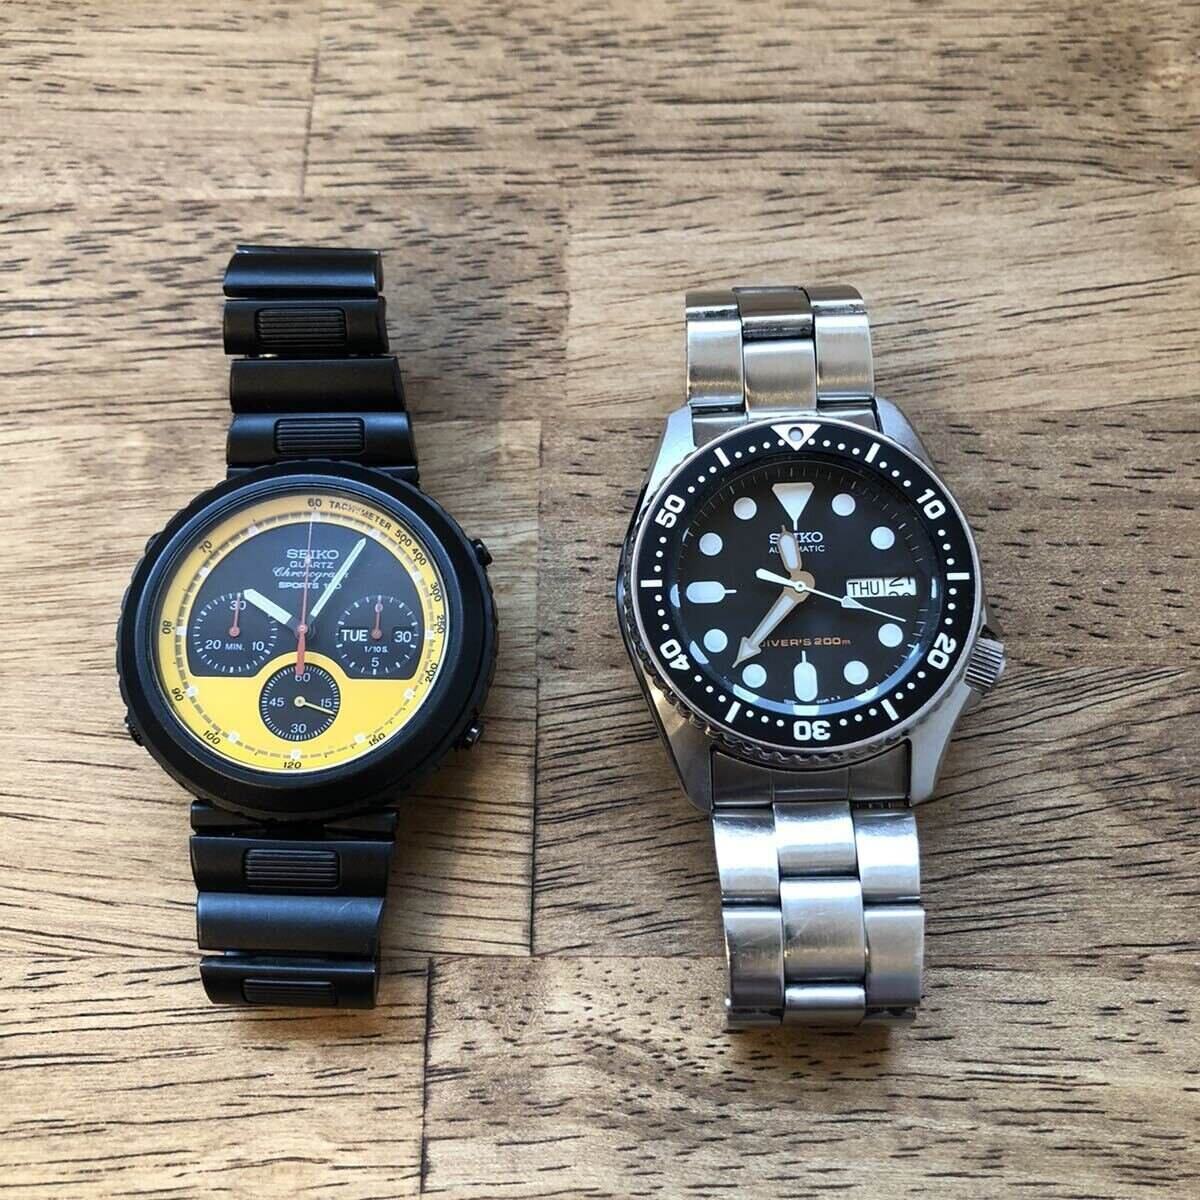 rsz_7a38-7140-black-yellowface-yahoojapan-july2021-re-listed-with-skx013k-1.jpg